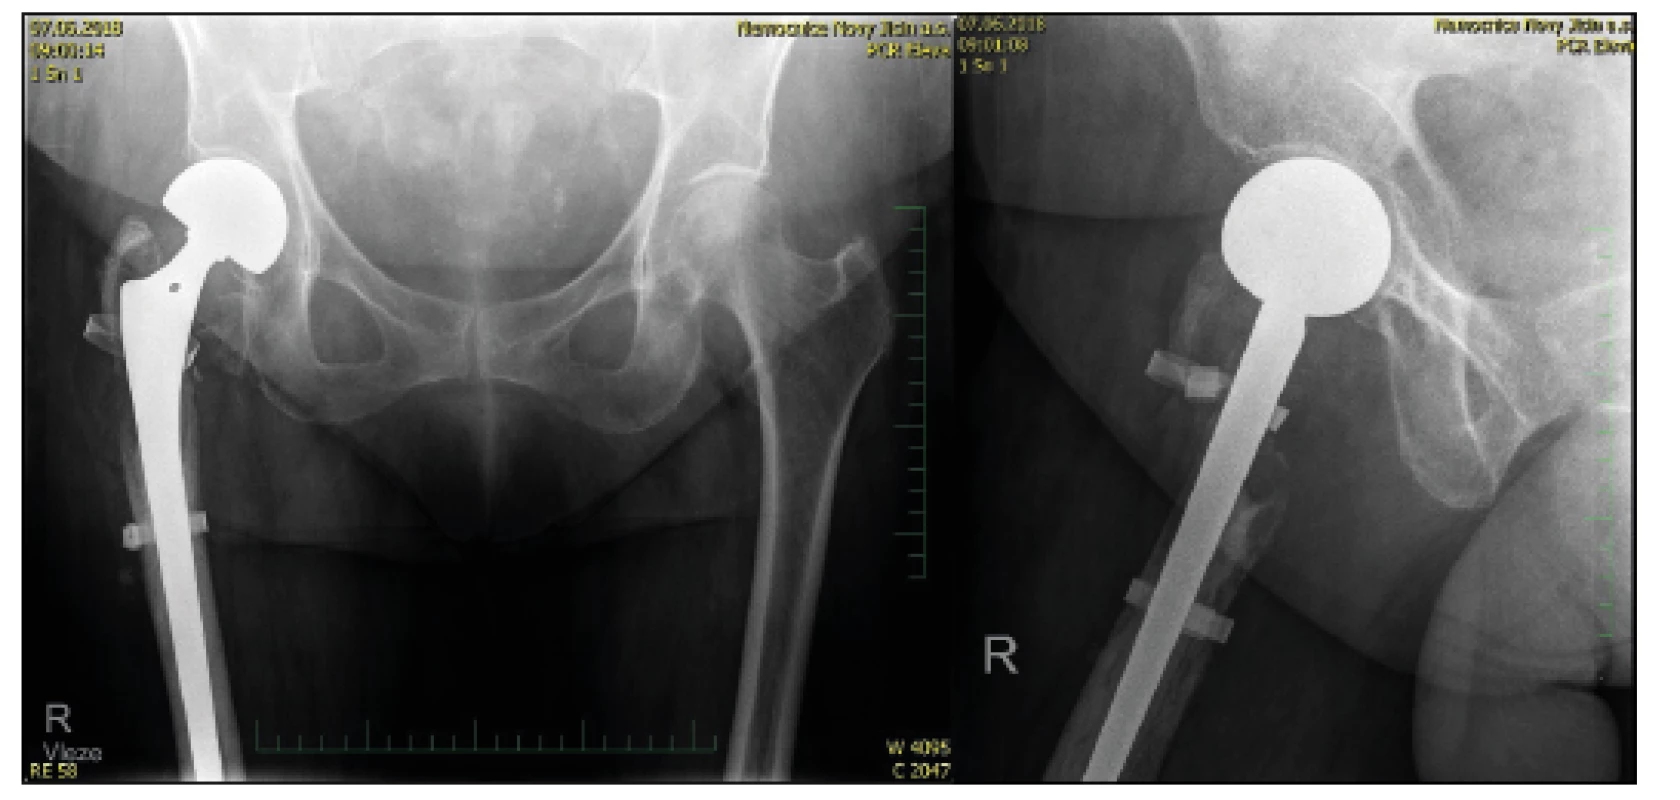 76-year-old female with comminuted fracture of the trochanteric
massive, control X-ray after implantation of total joint endoprosthesis
with stabilizing cerclage